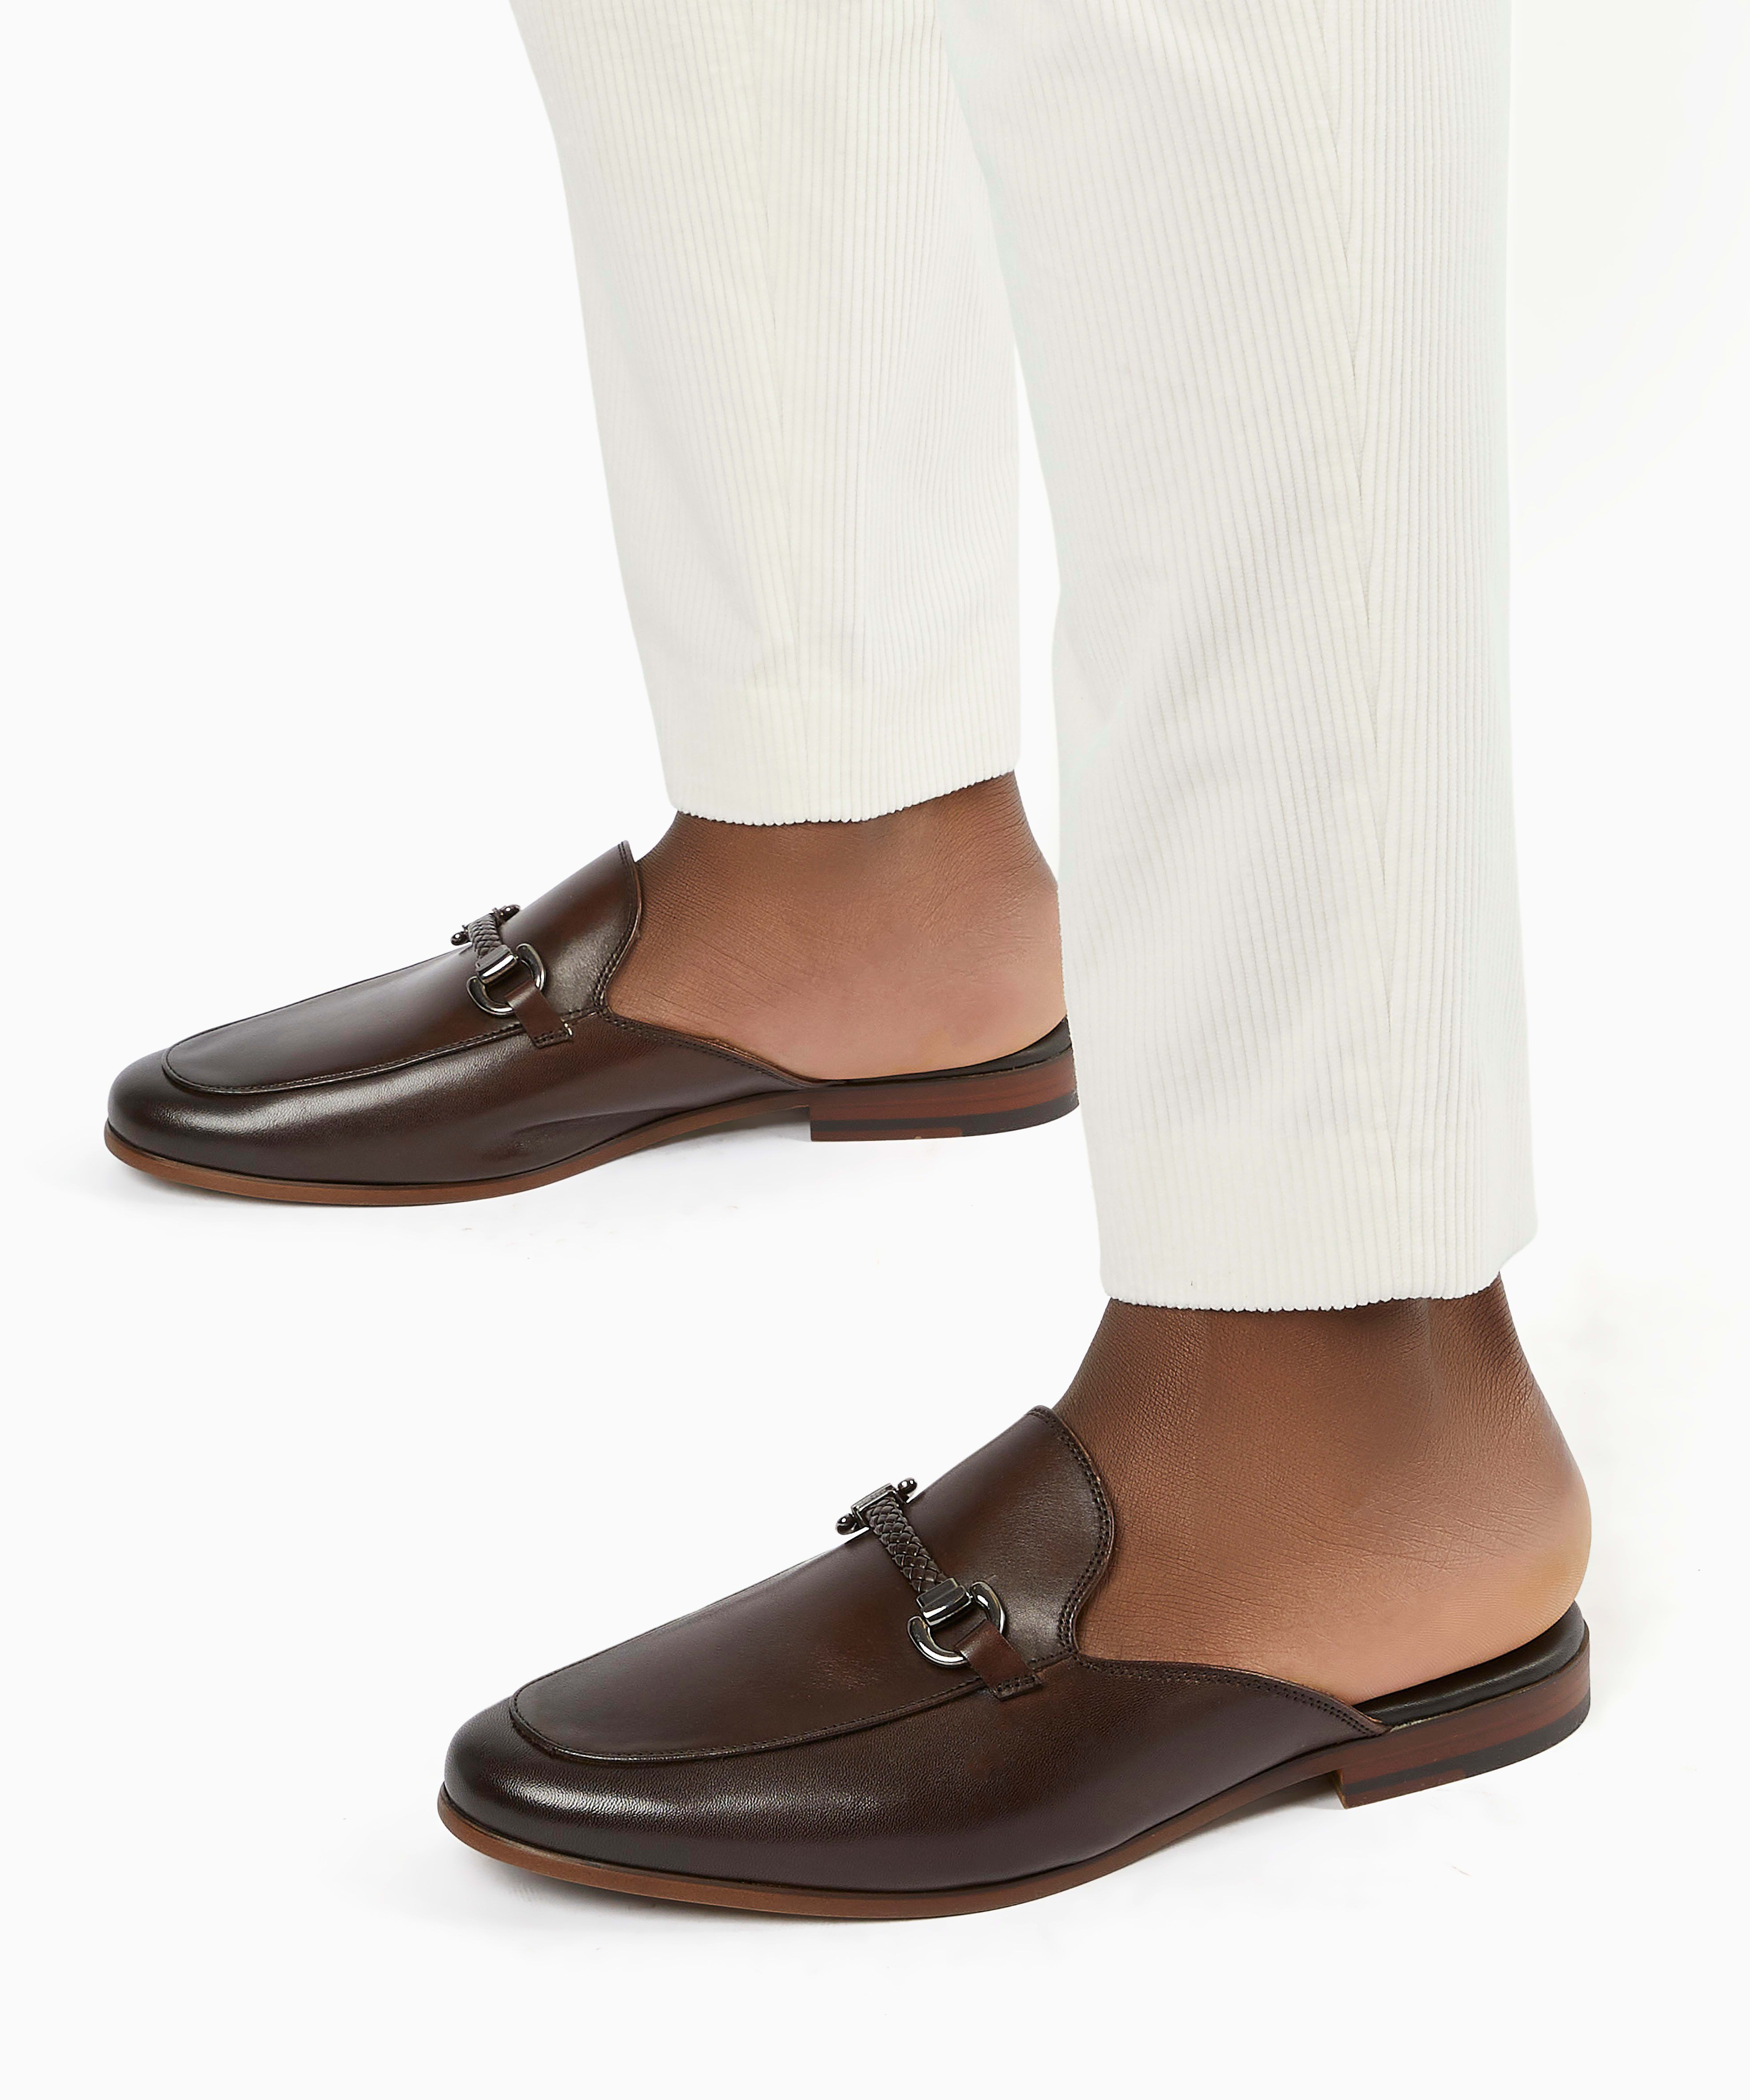 Upgrade your selection of suave footwear with these smart loafers. Their backless silhouette is both comfortable and on-trend.